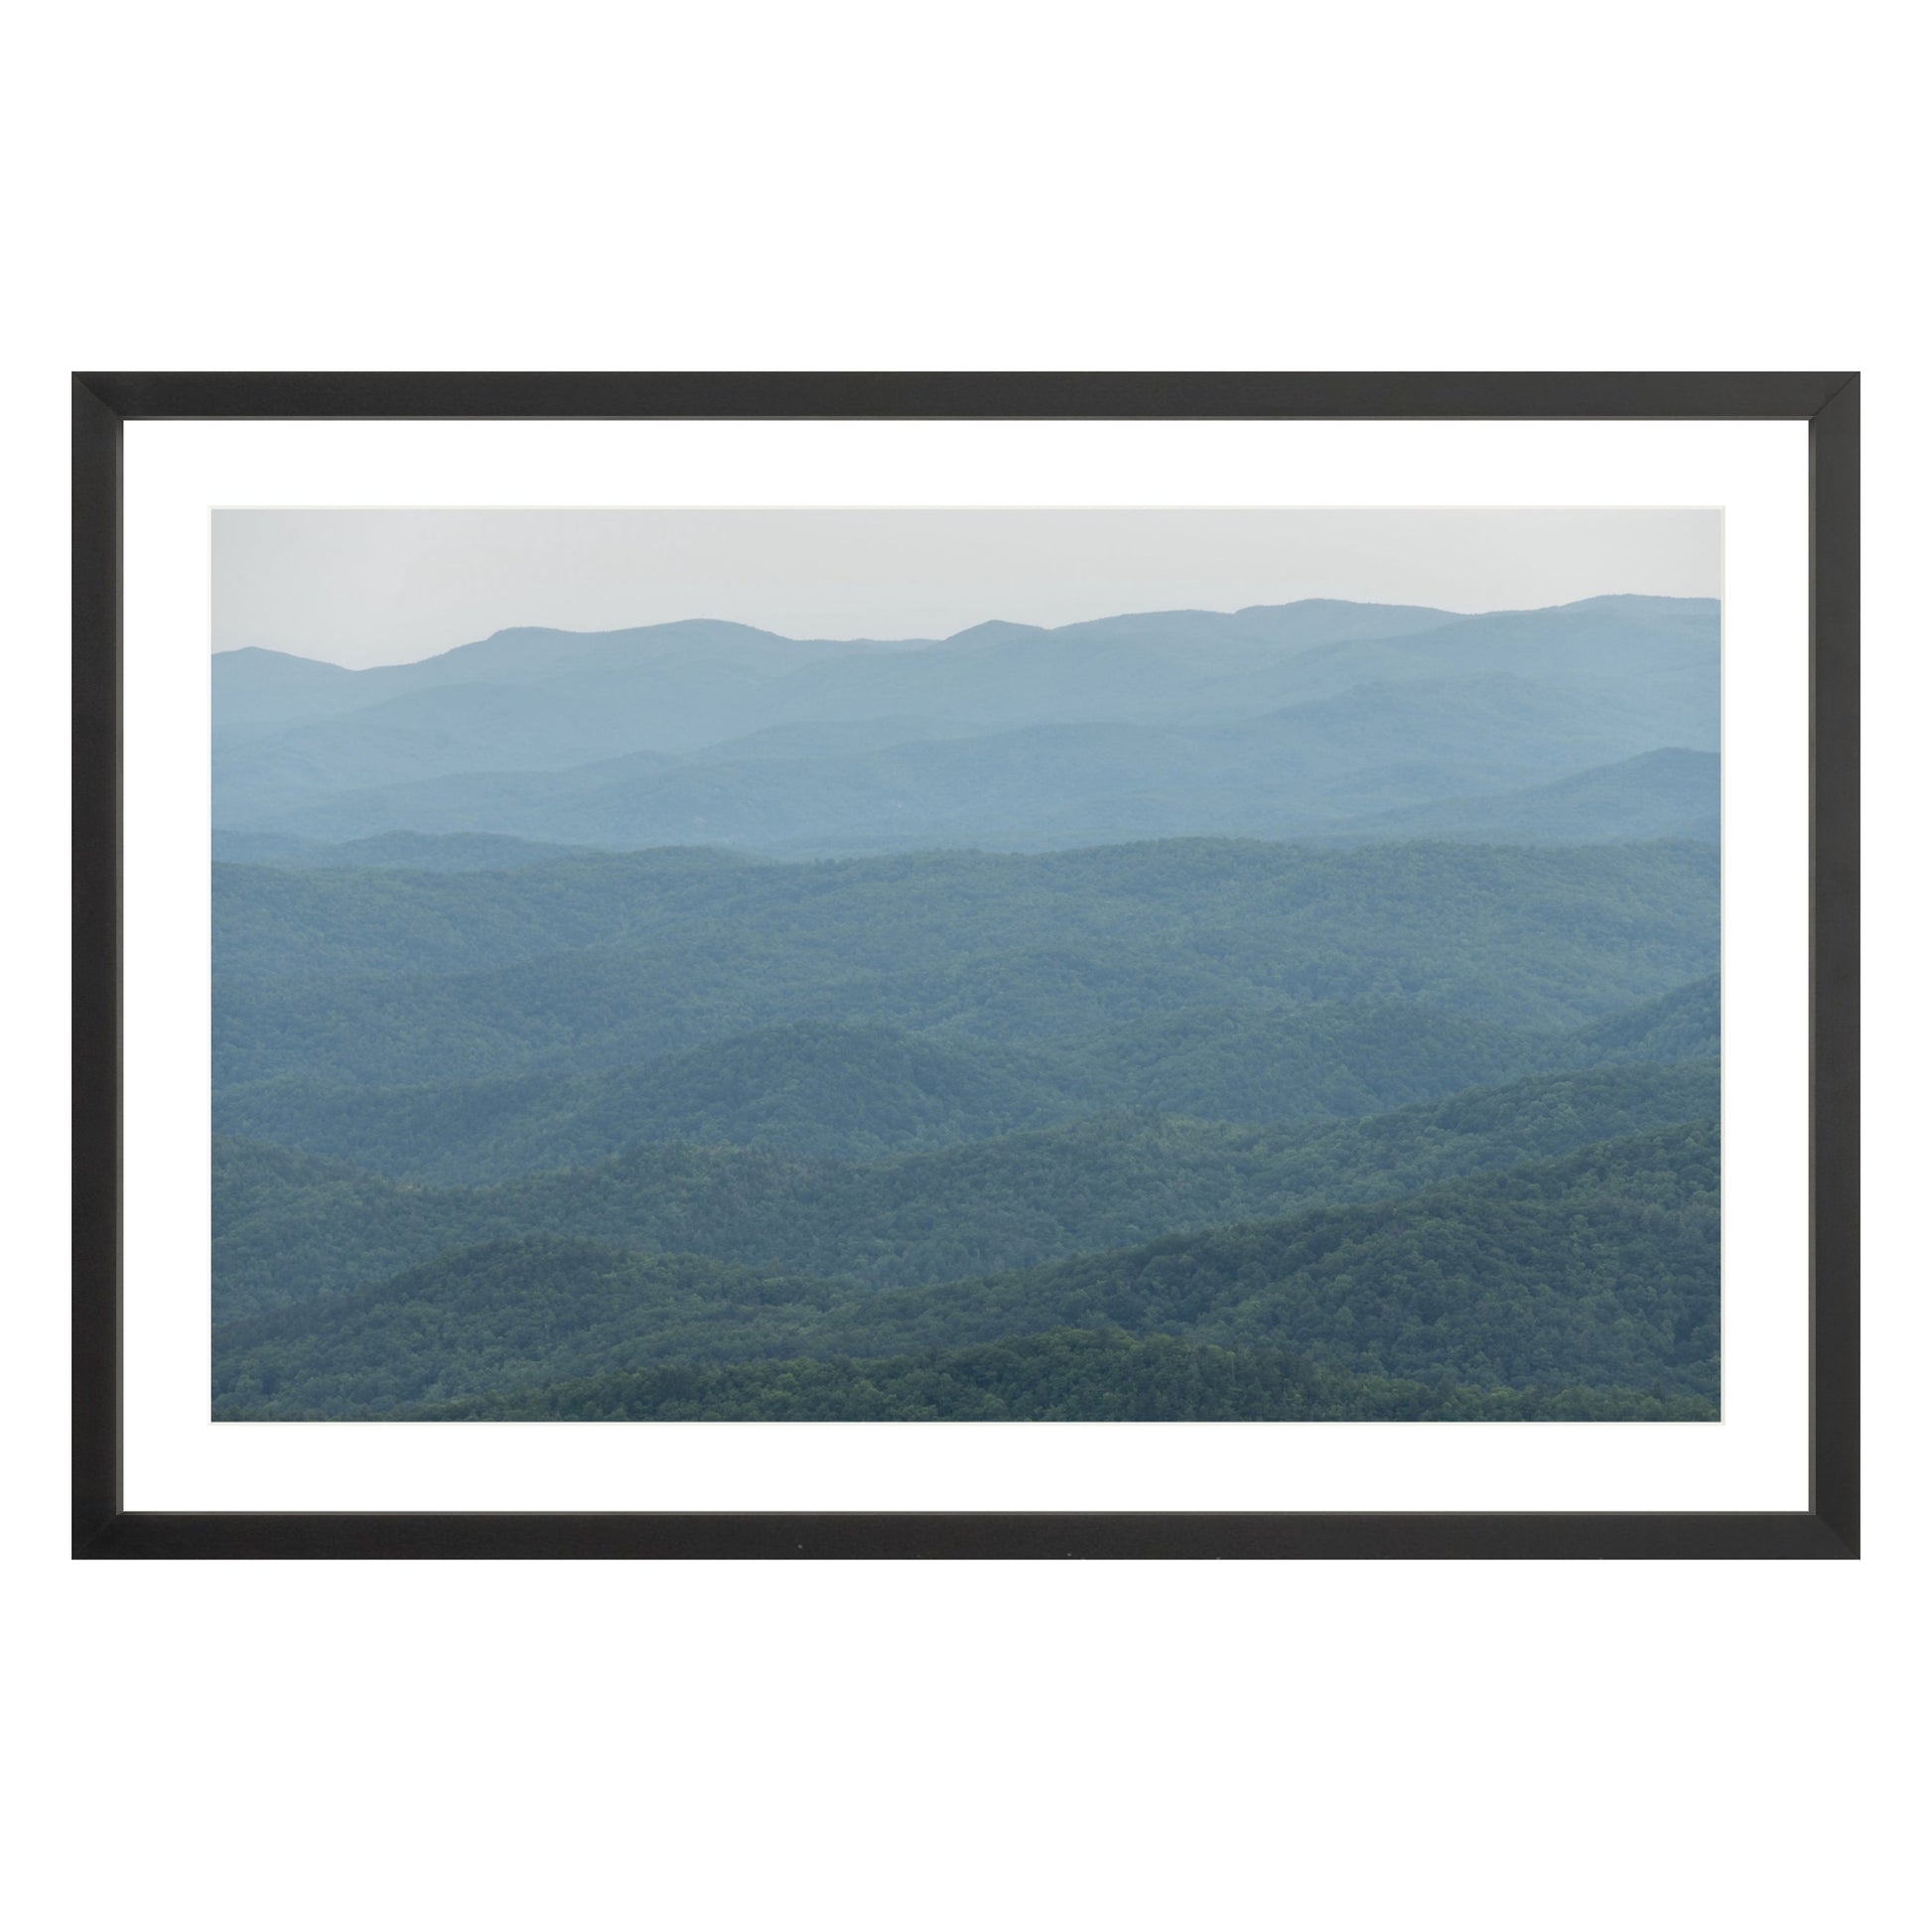 Photograph of mountains in North Carolina framed in black with white mat